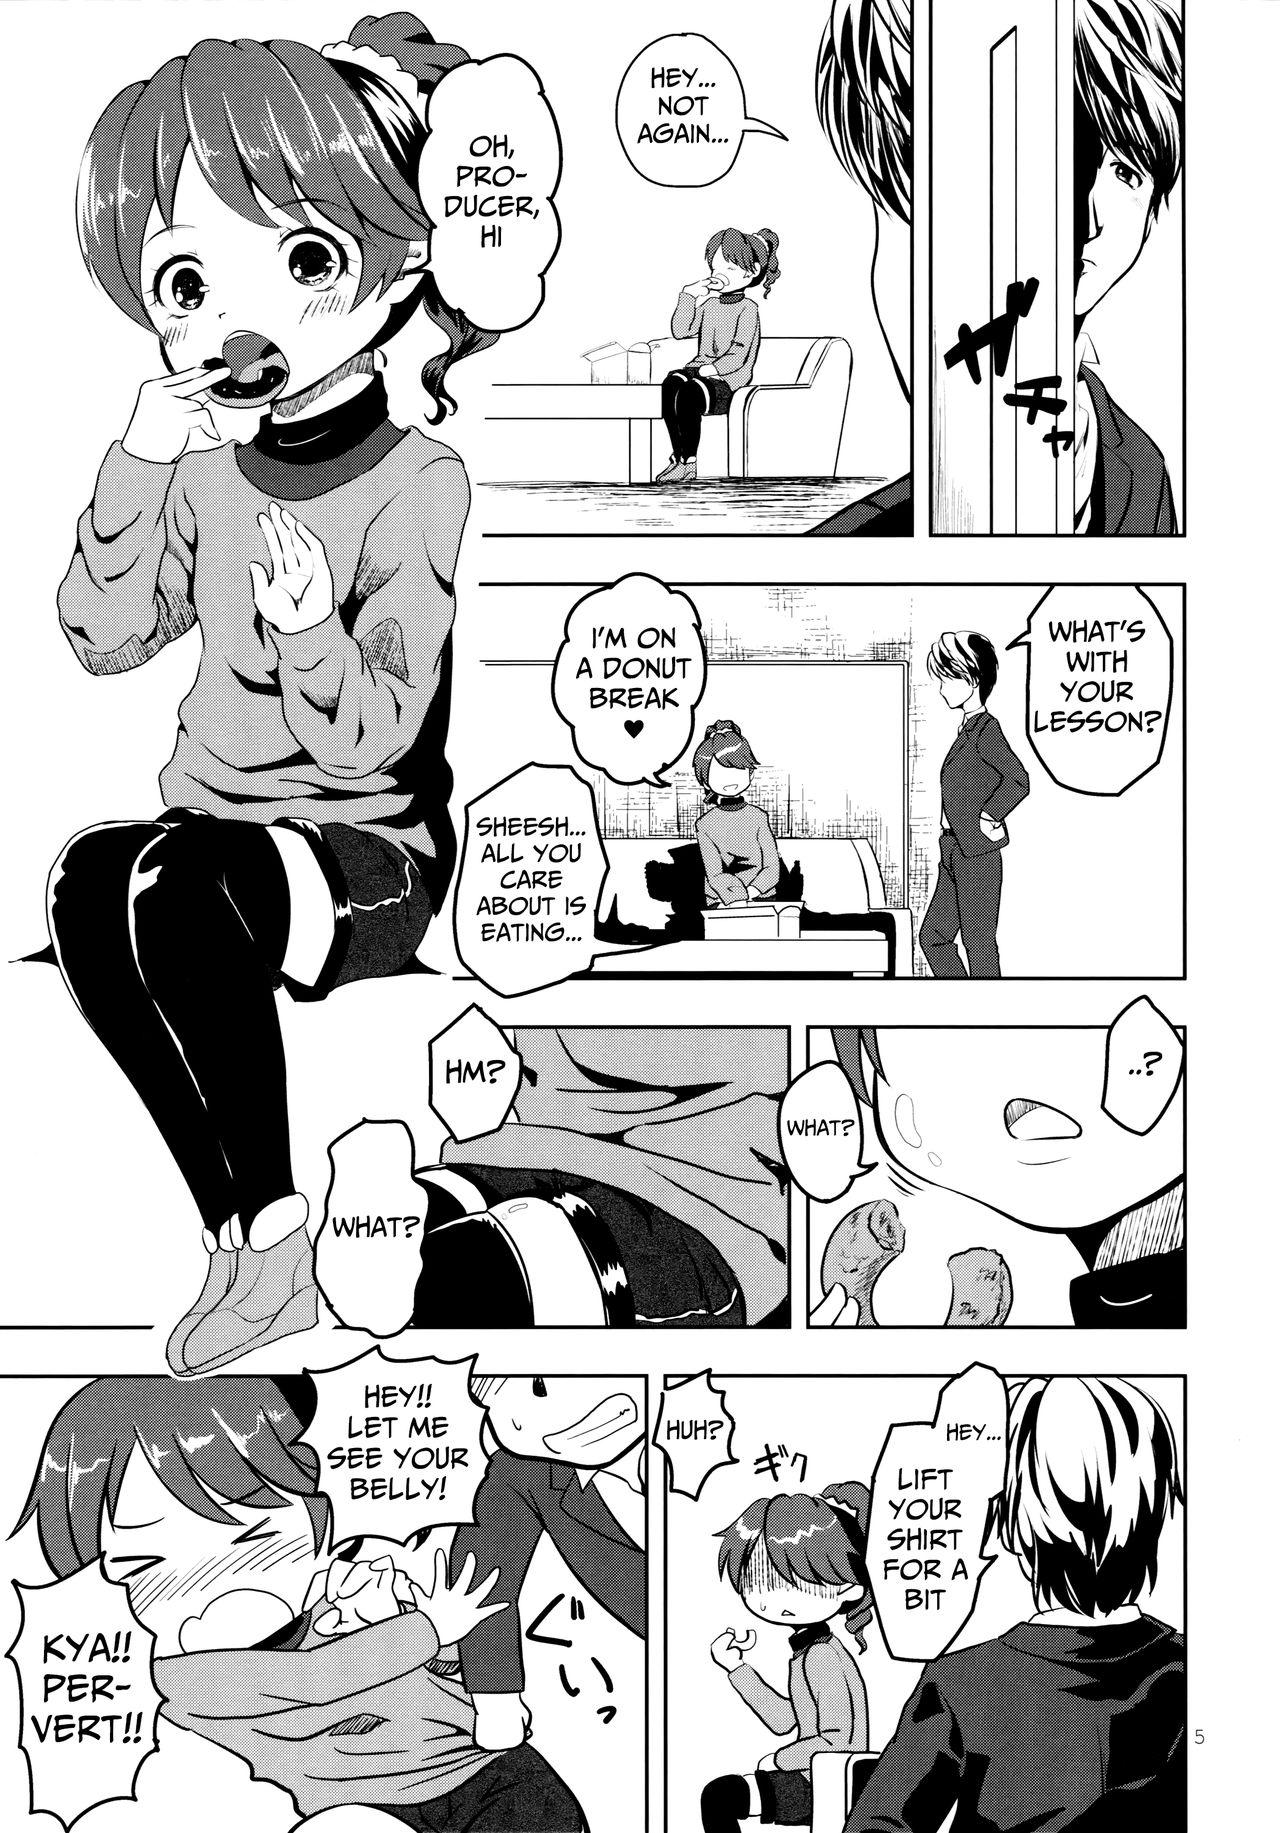 Hugecock DONUTS LESSON - The idolmaster Butthole - Page 4